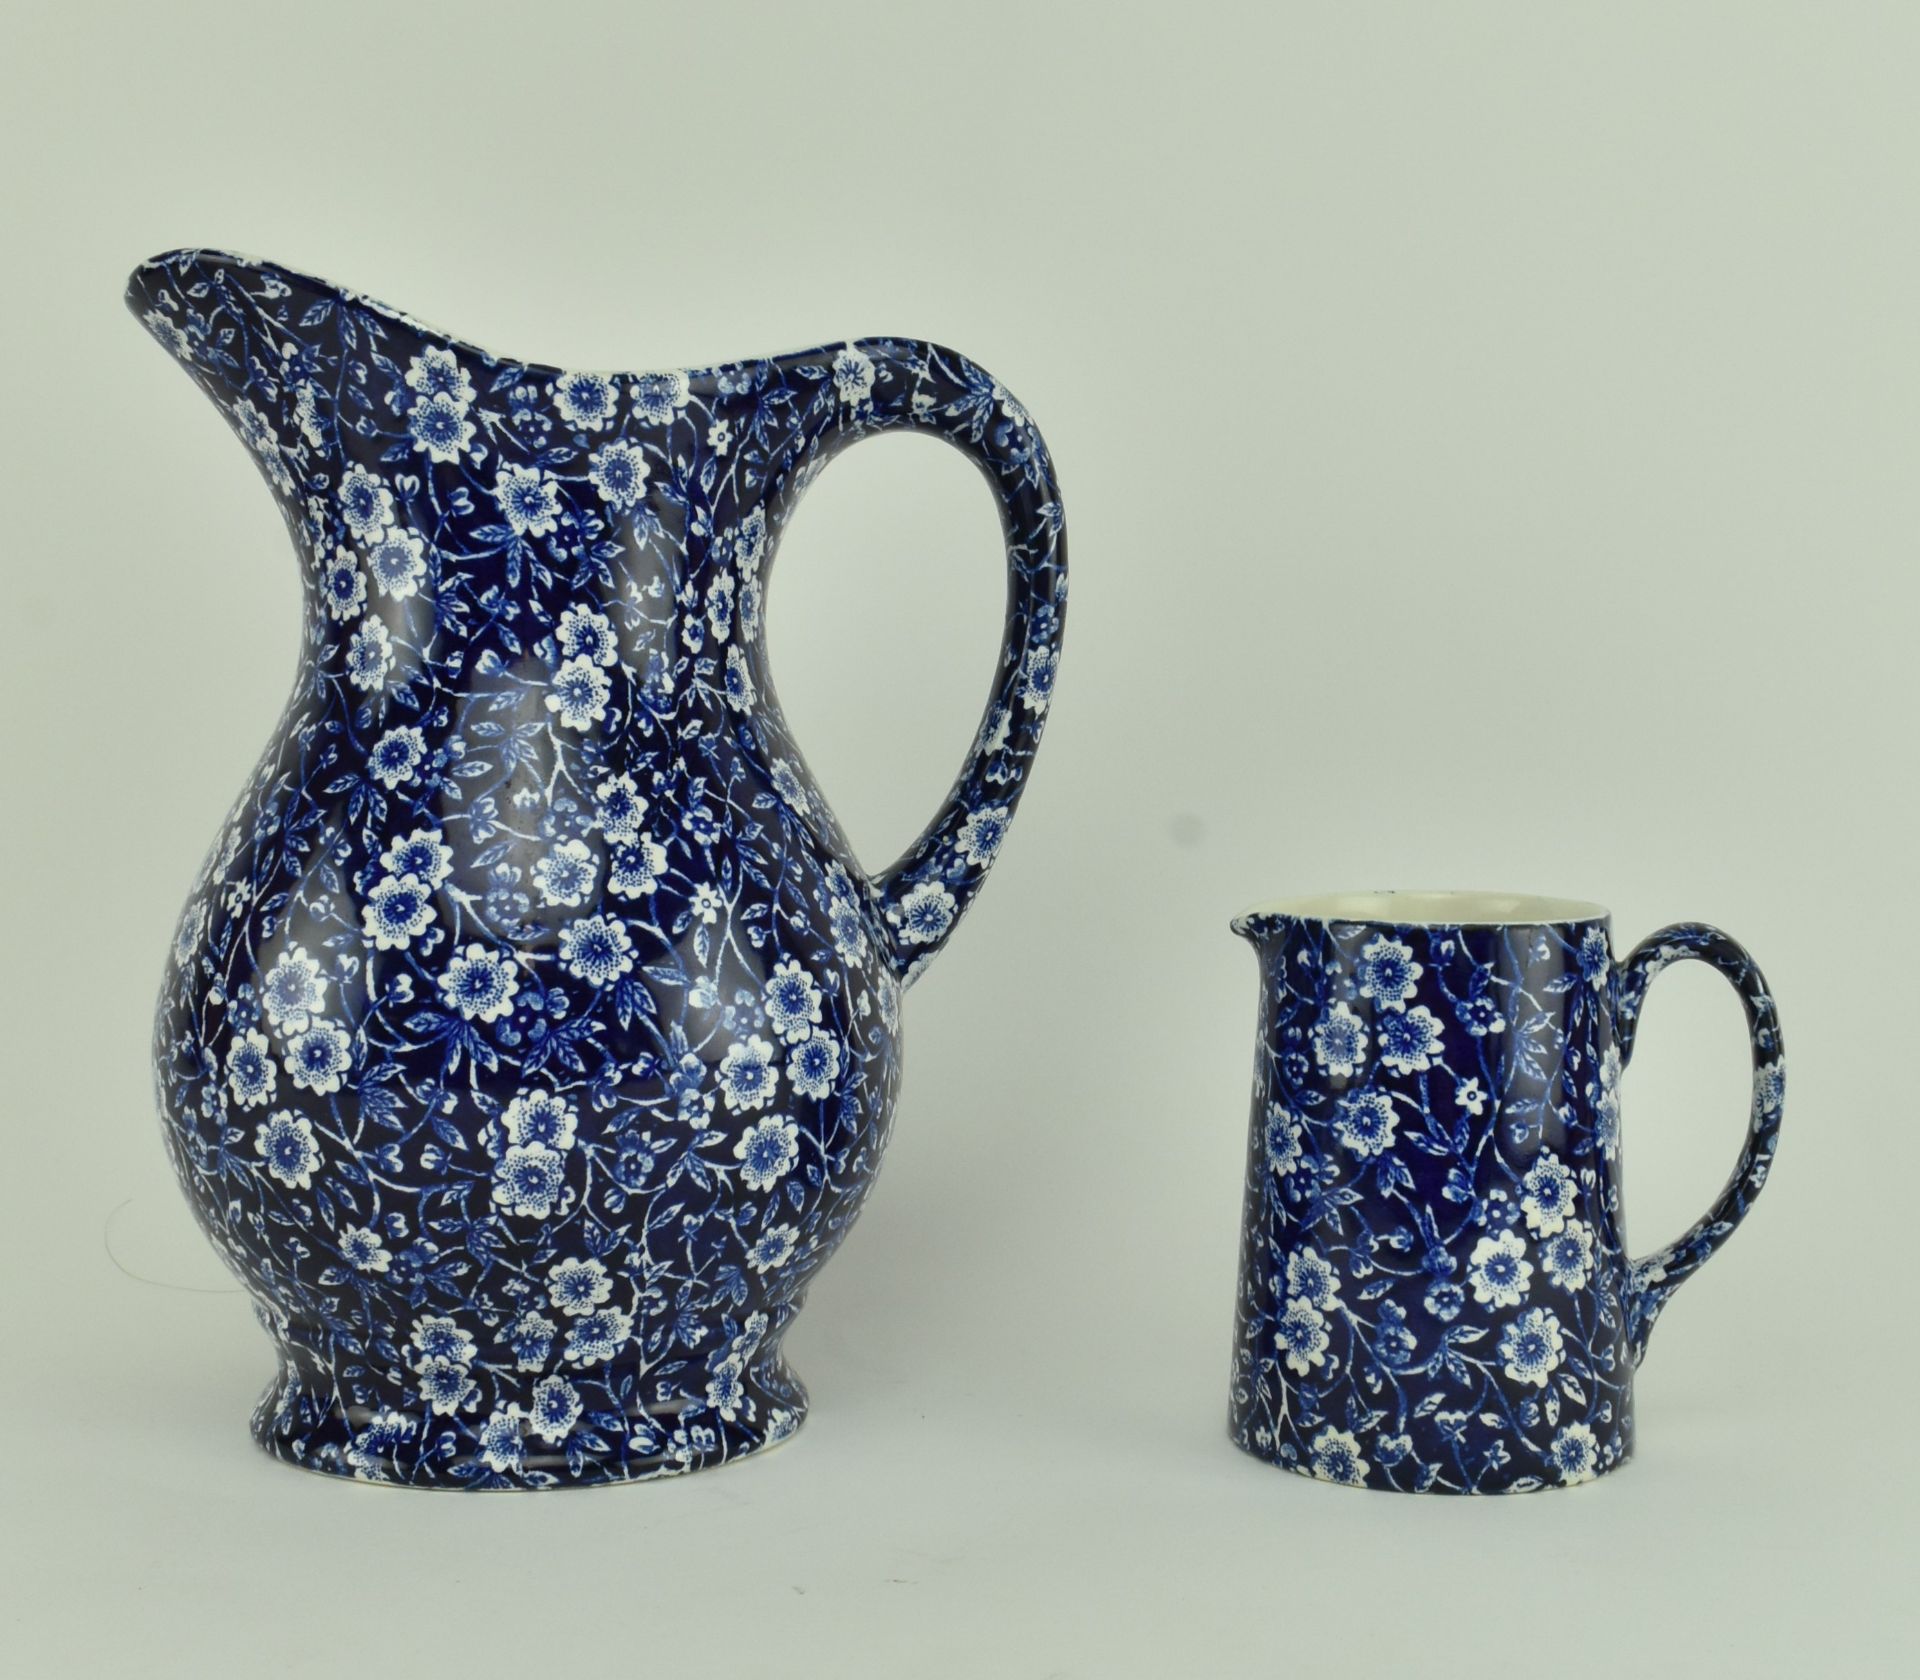 SELECTION OF BLUE AND WHITE BURLEIGH CERAMIC TABLEWARES - Image 5 of 15